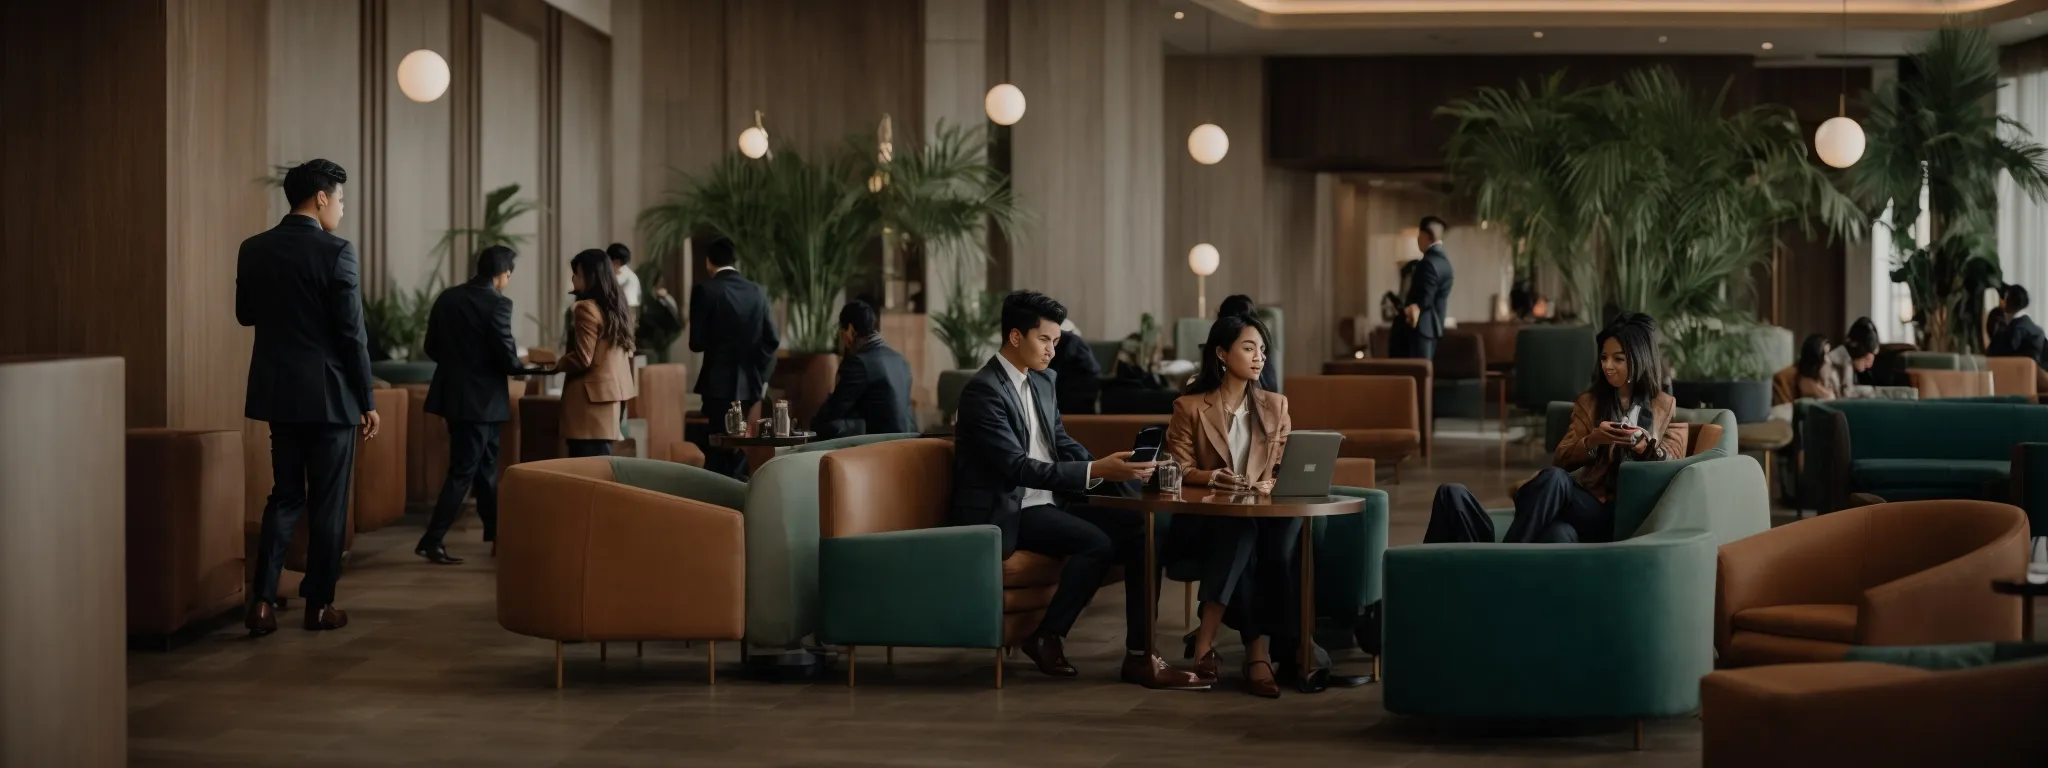 a modern hotel lobby with guests comfortably using their smartphones and laptops.